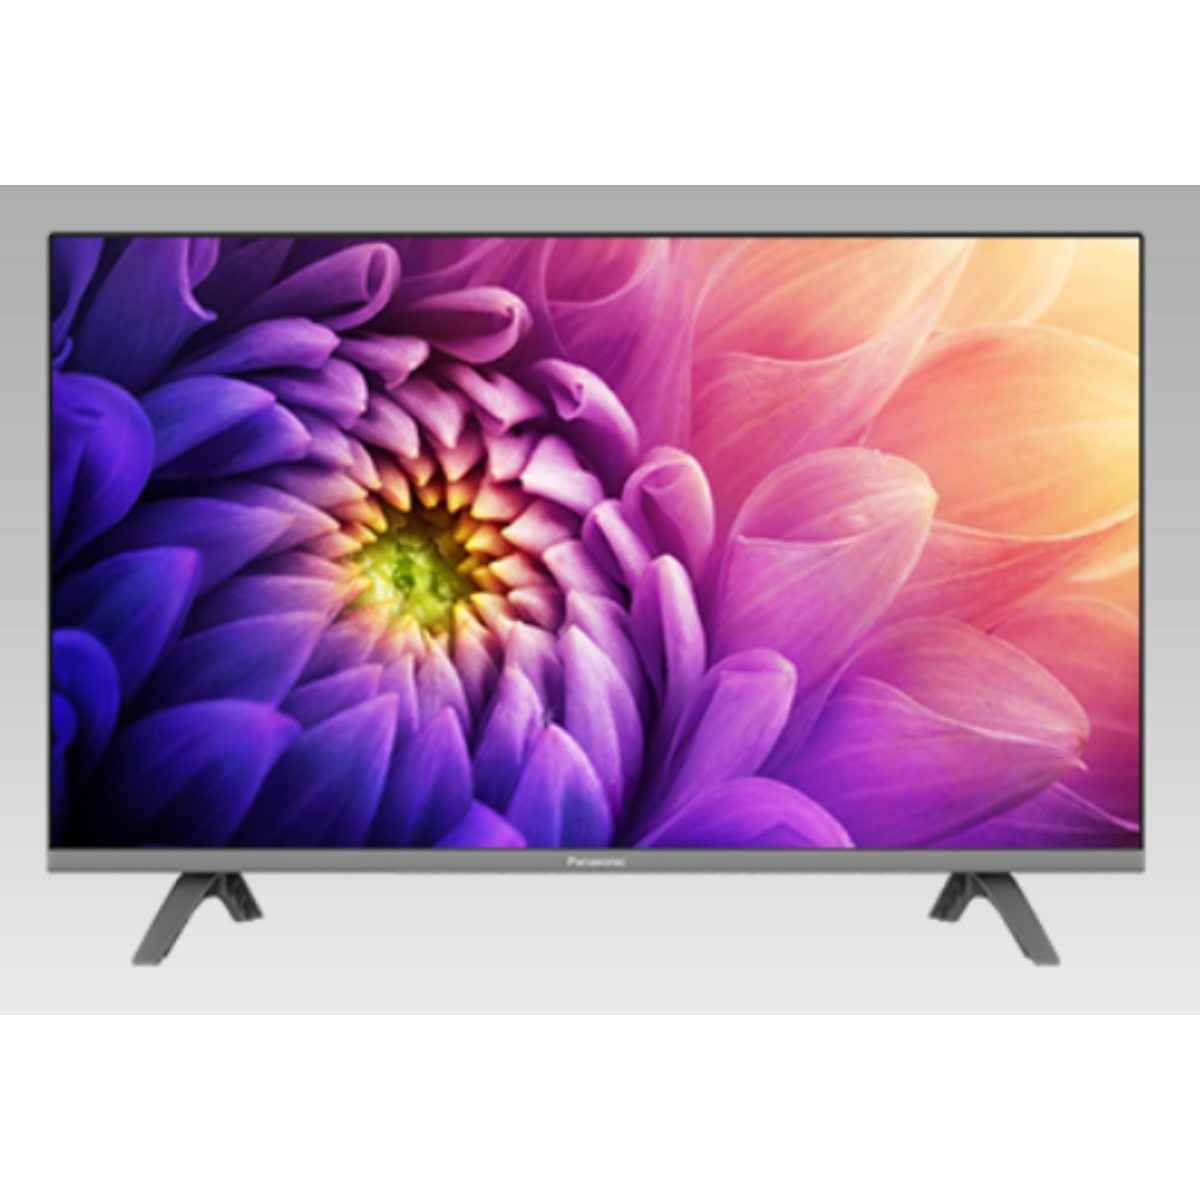 Panasonic TH-32HS700 32 inch HD Android TV